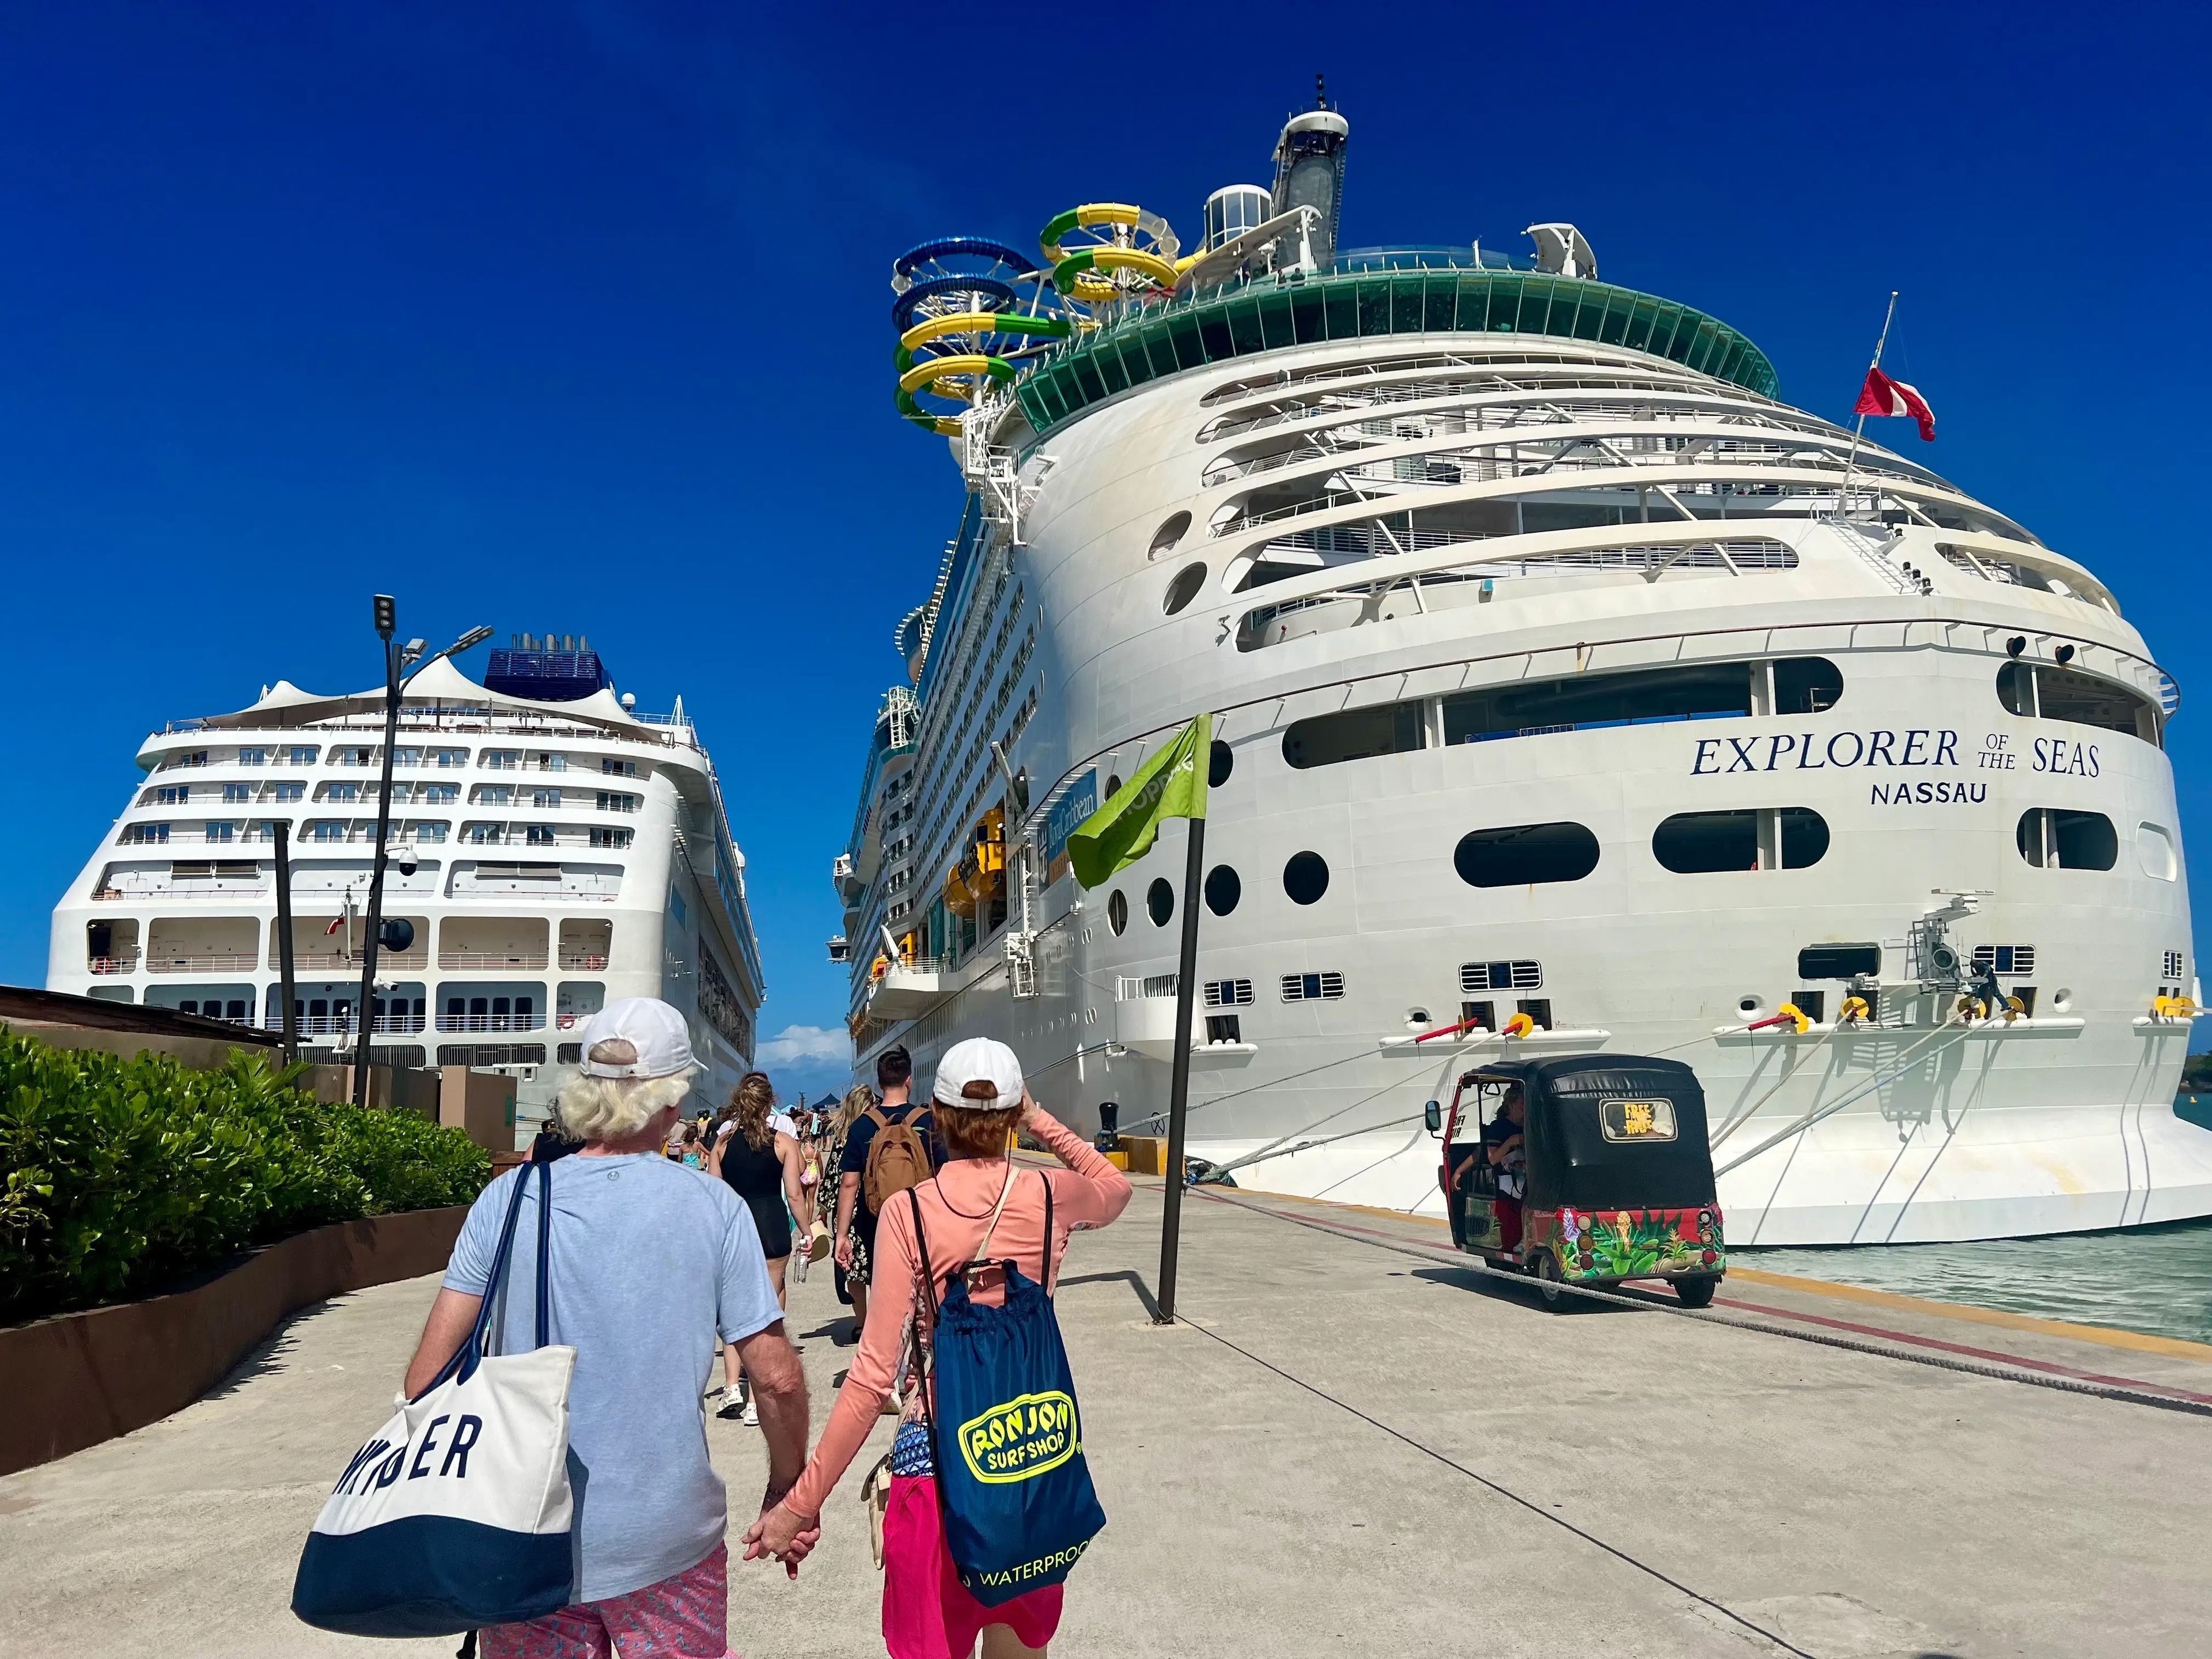 The view of the Norwegian Sky (left) next to Royal Caribbean's Explorer of the Seas (right), which has been upgraded with slides.